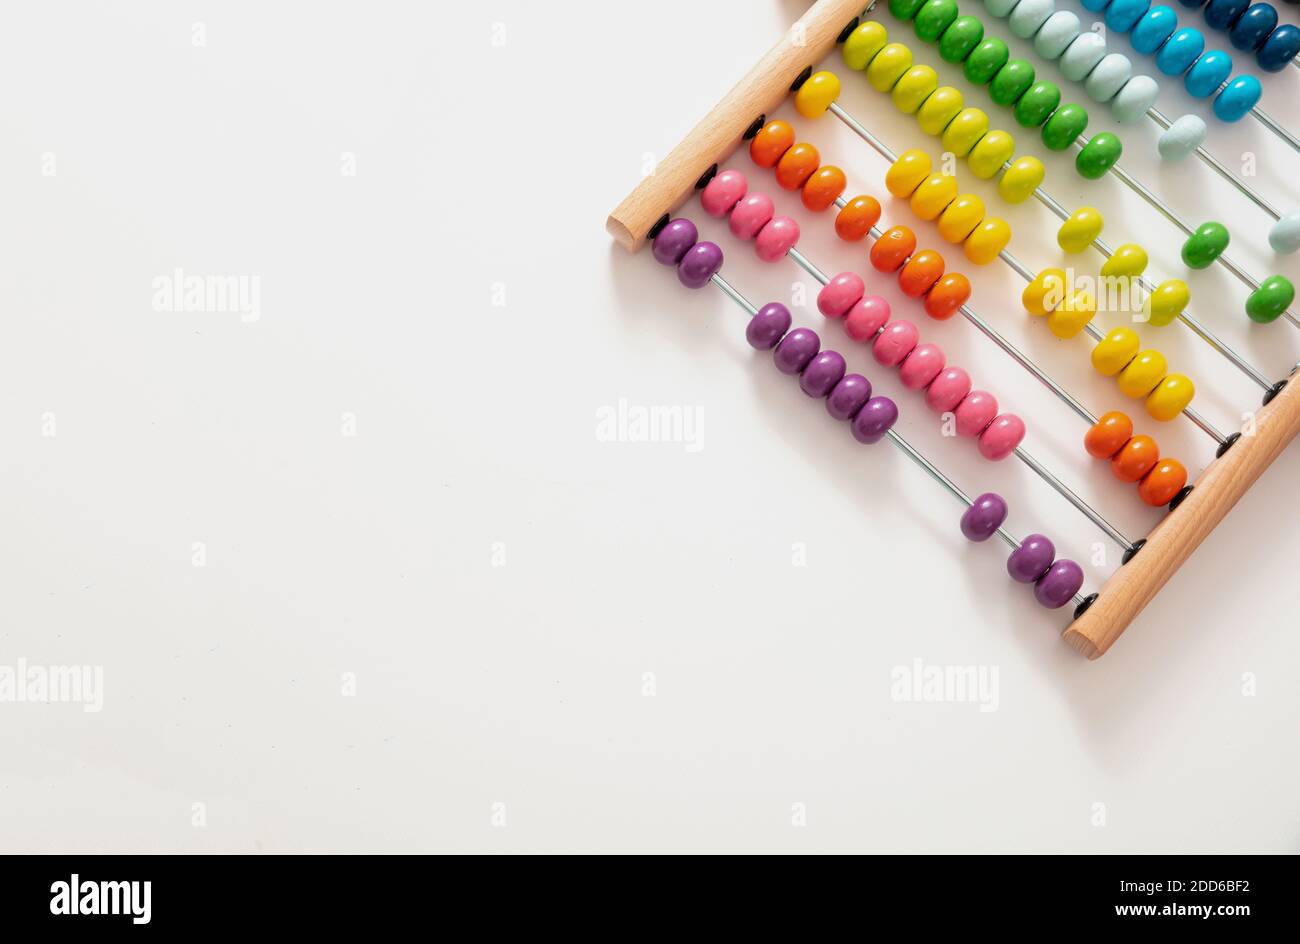 School abacus with colorful beads on white color background, close up view, copy space. Kids learning count, children math class concept Stock Photo